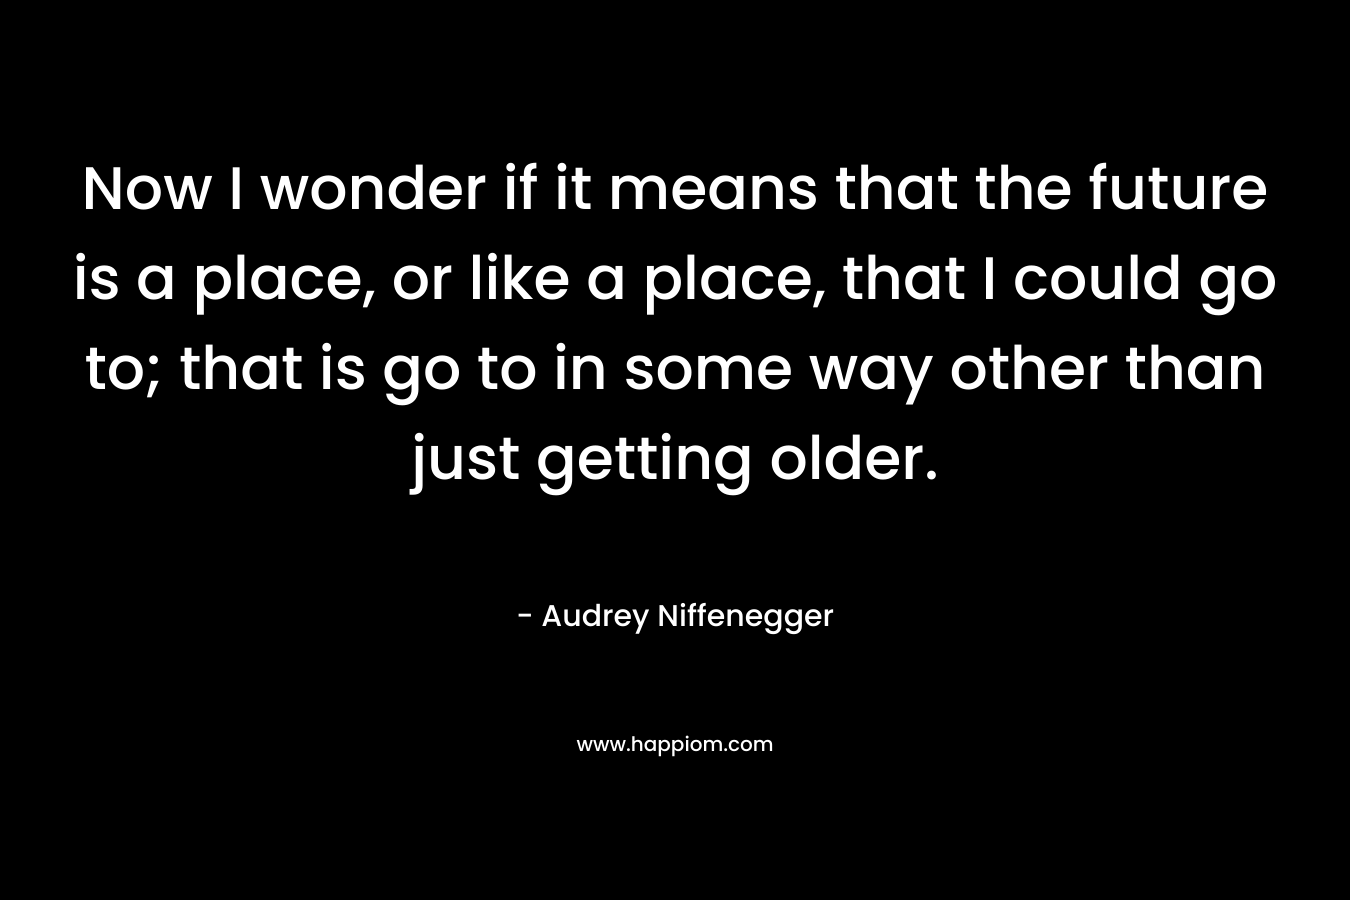 Now I wonder if it means that the future is a place, or like a place, that I could go to; that is go to in some way other than just getting older.